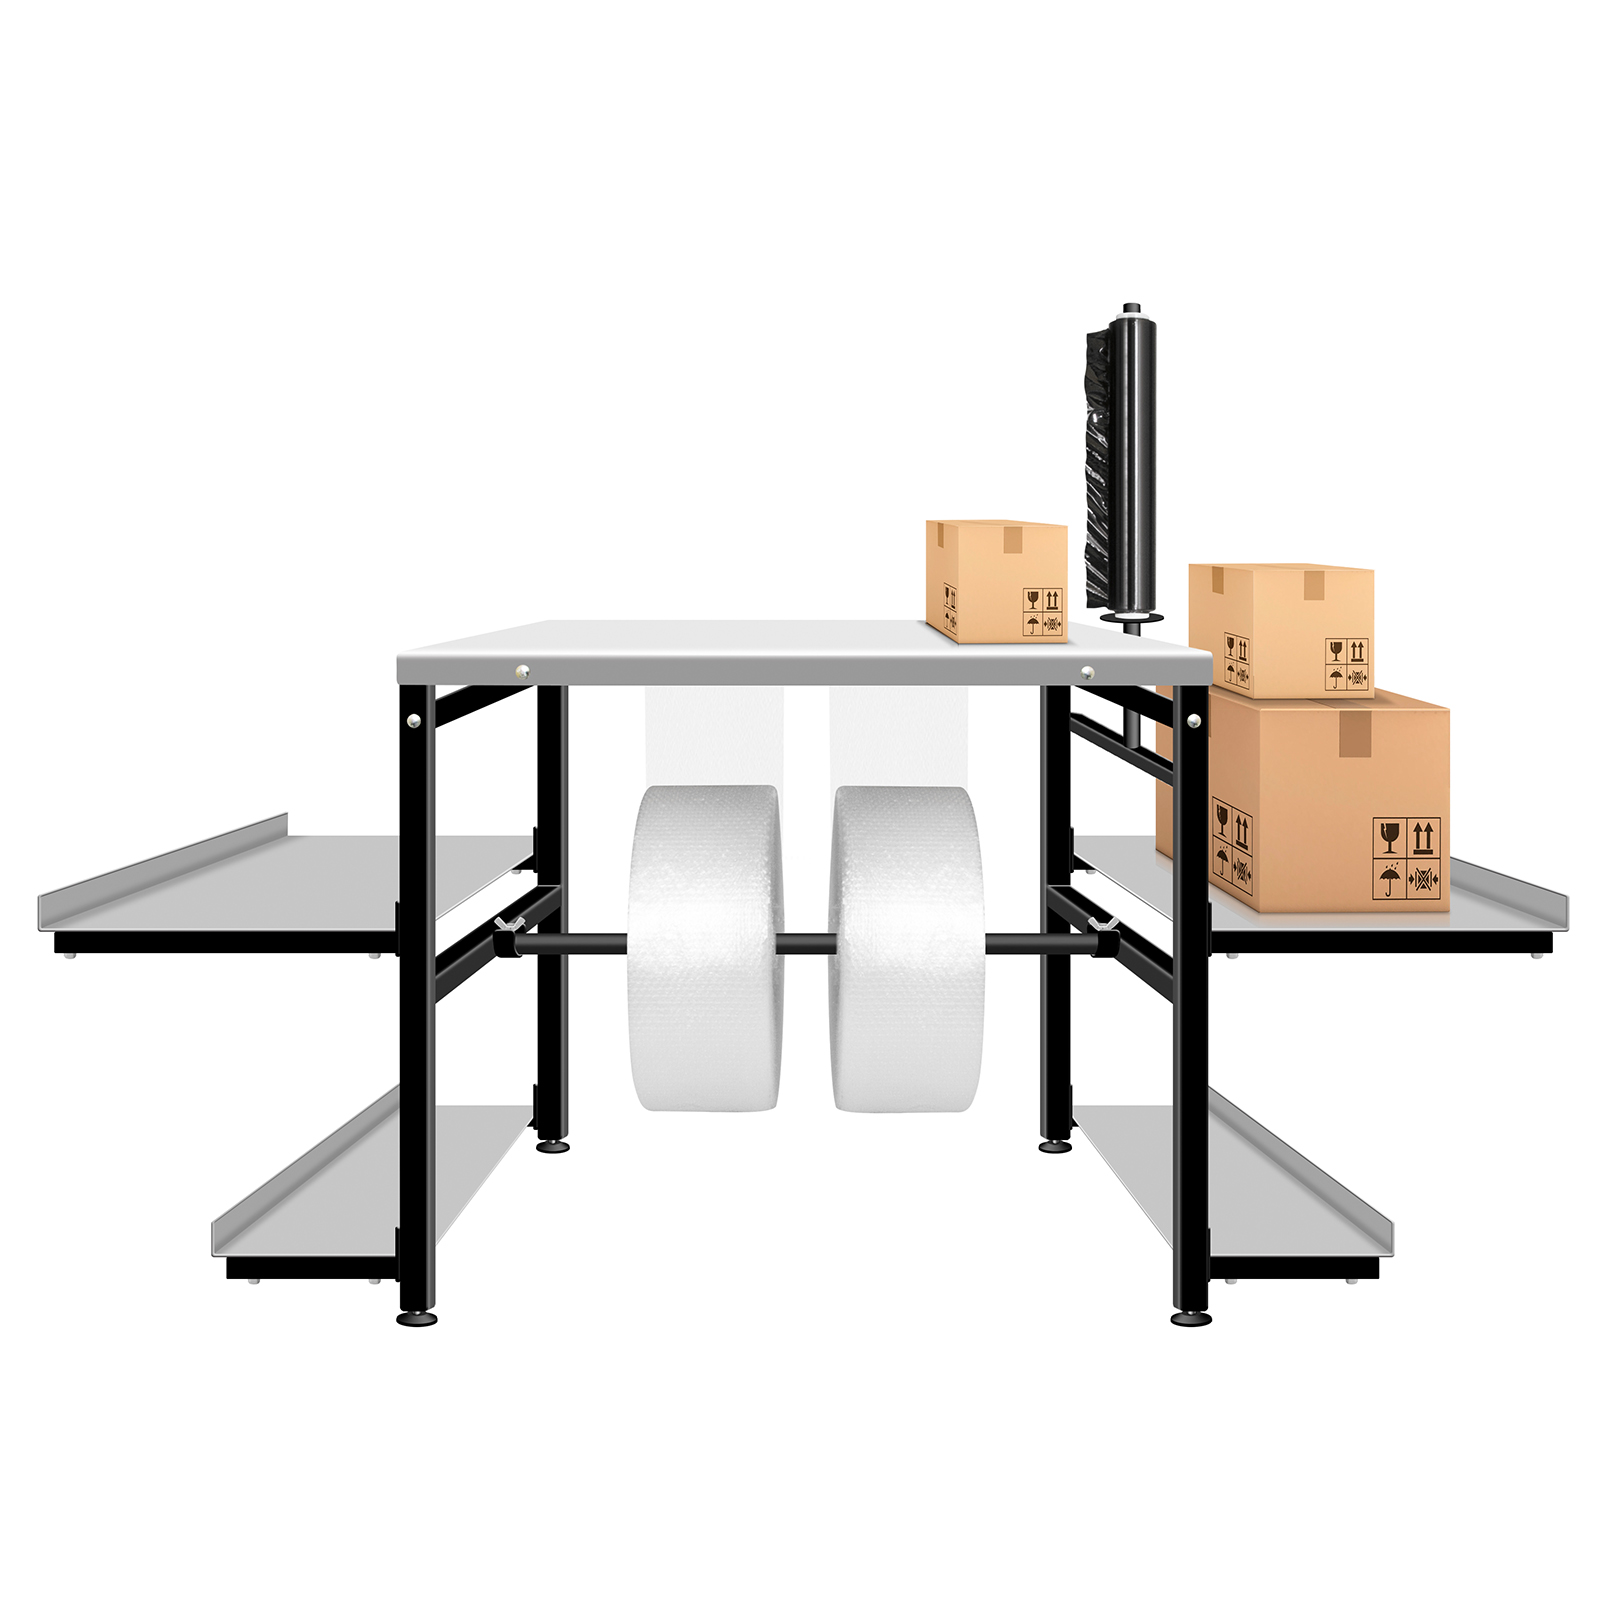 Auxiliary table for packing parcels